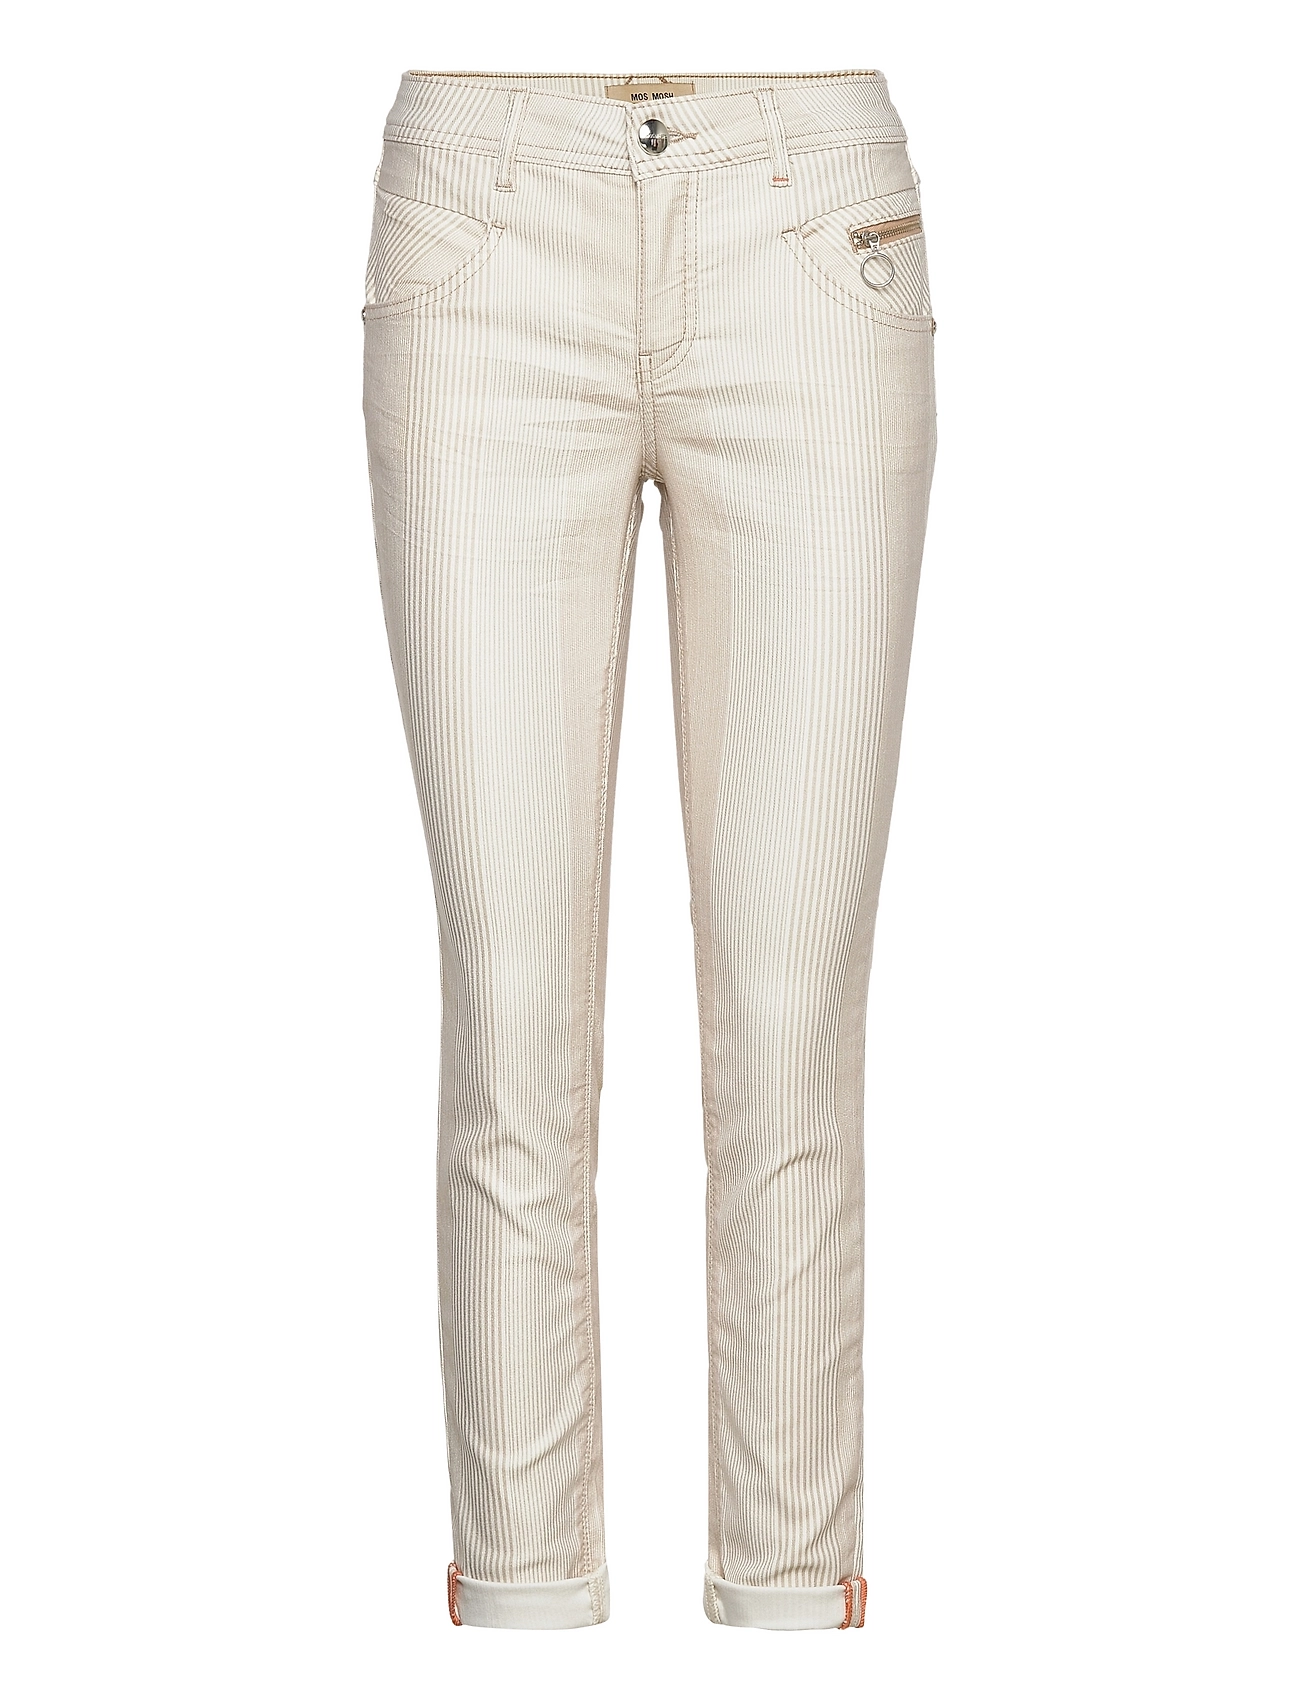 MOS MOSH Nelly Feather Stripe Pant - Skinny jeans -